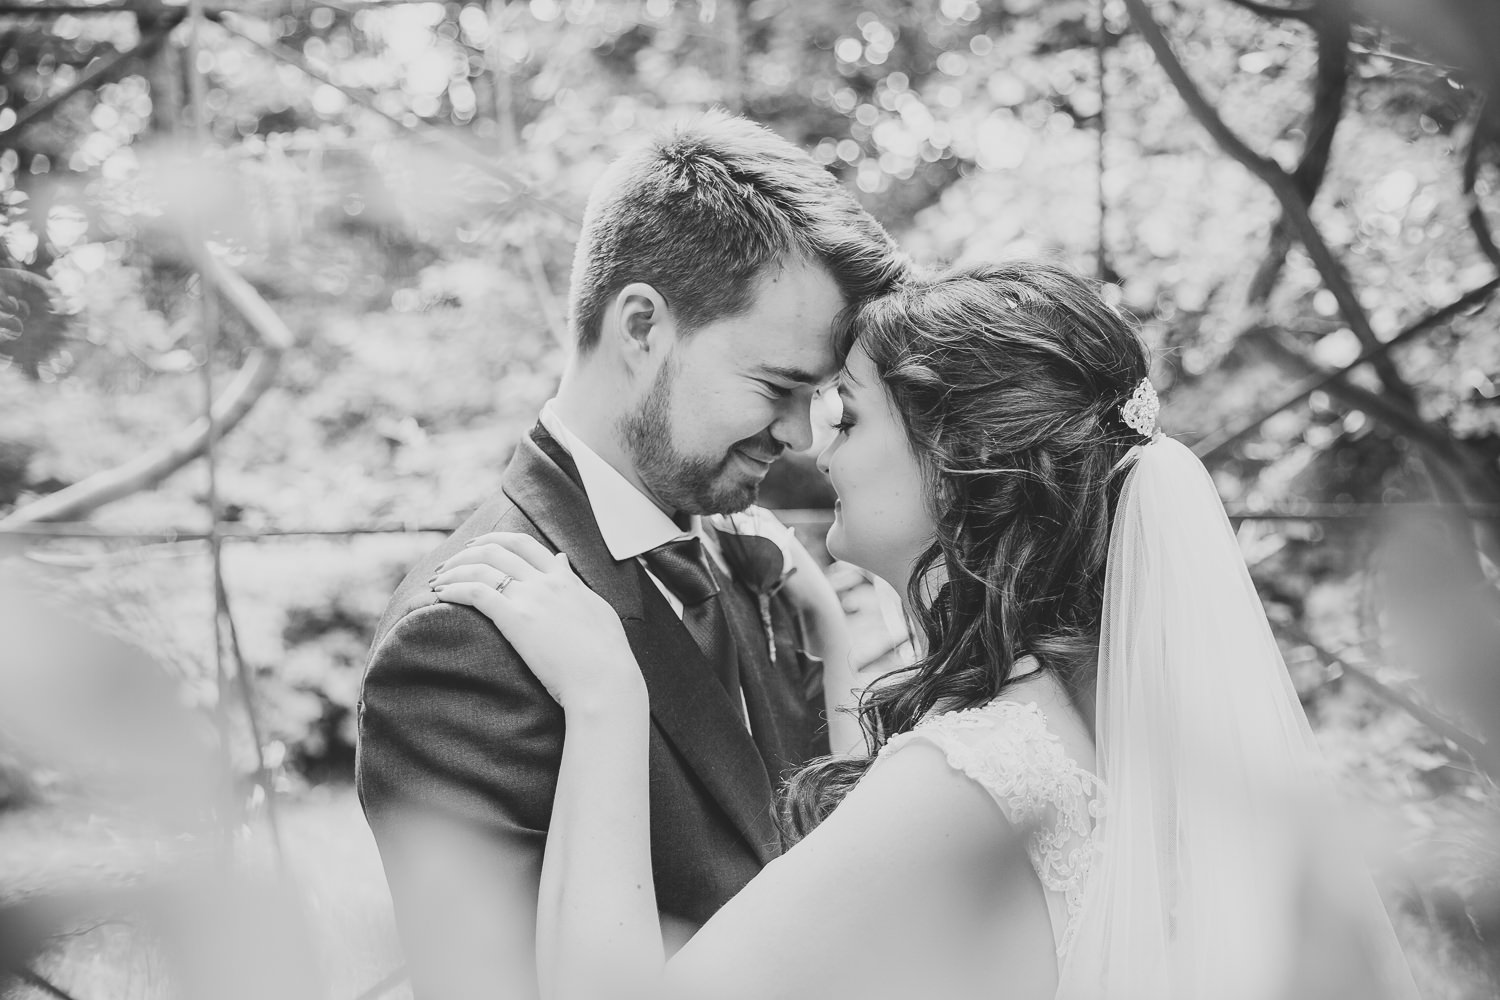 Black and white wedding photography of bride and groom in the park.